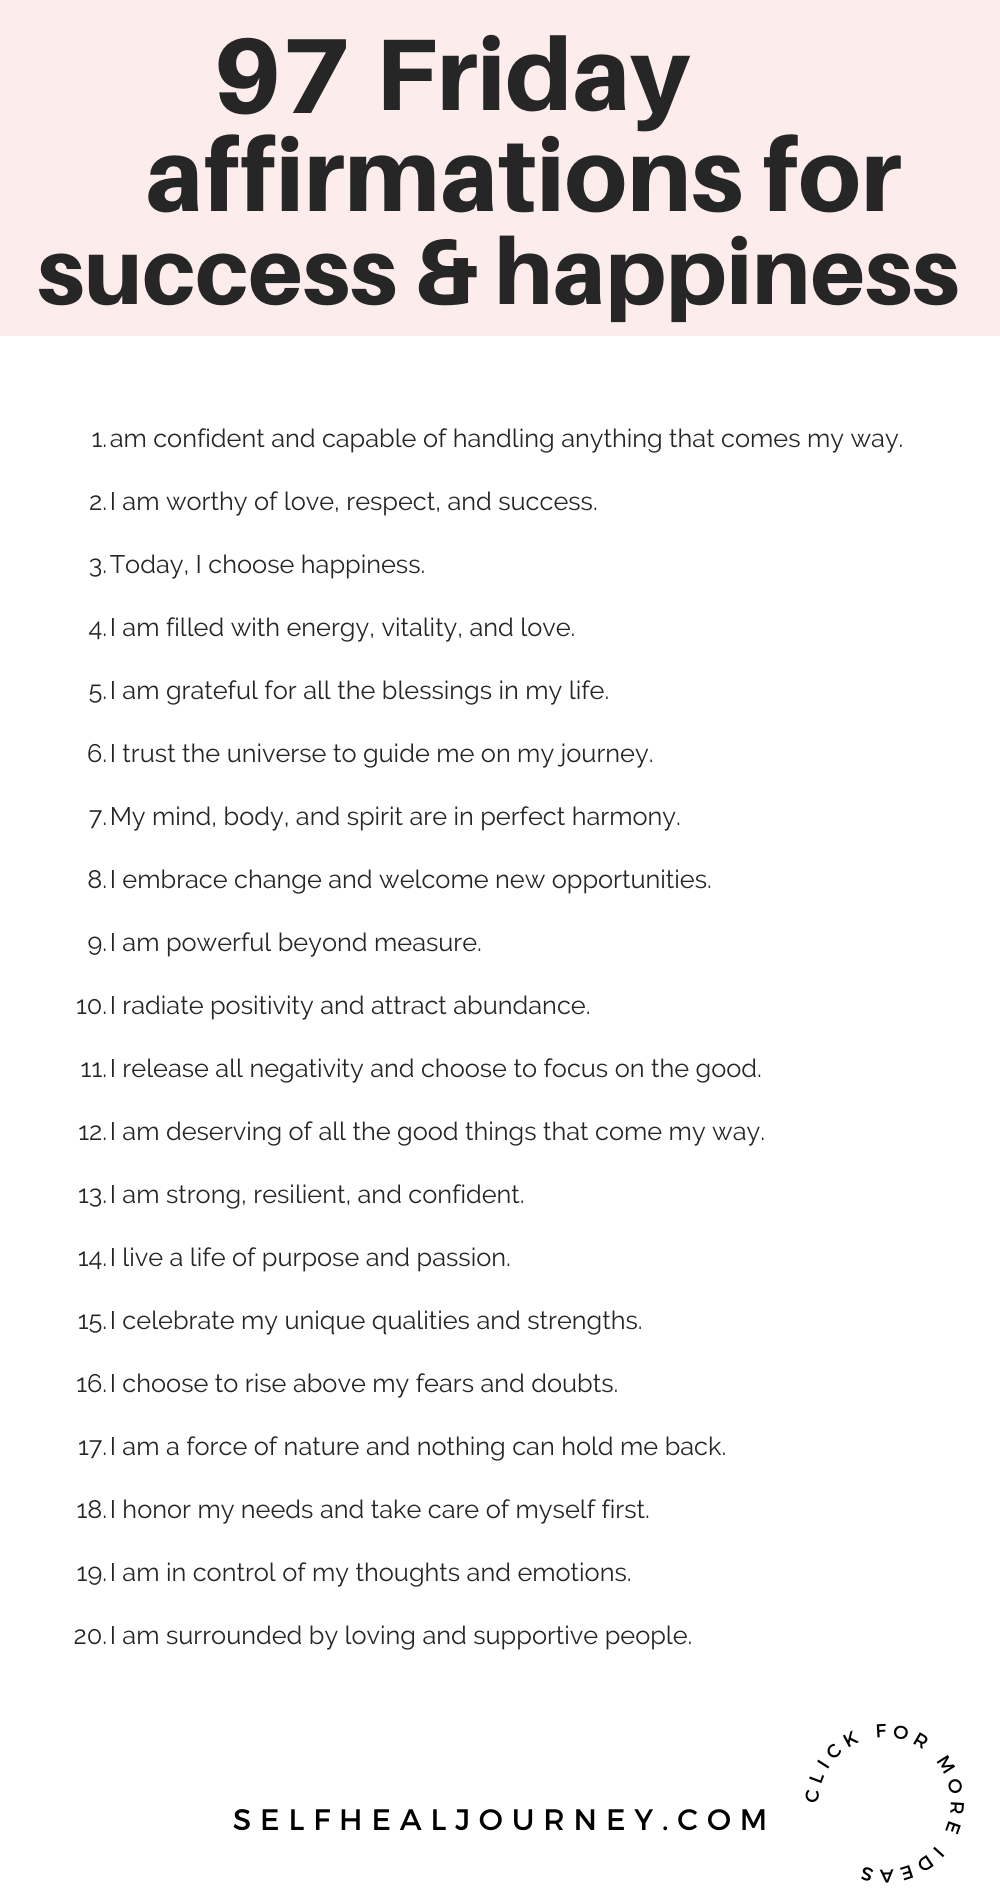 Friday affirmations for success and happiness